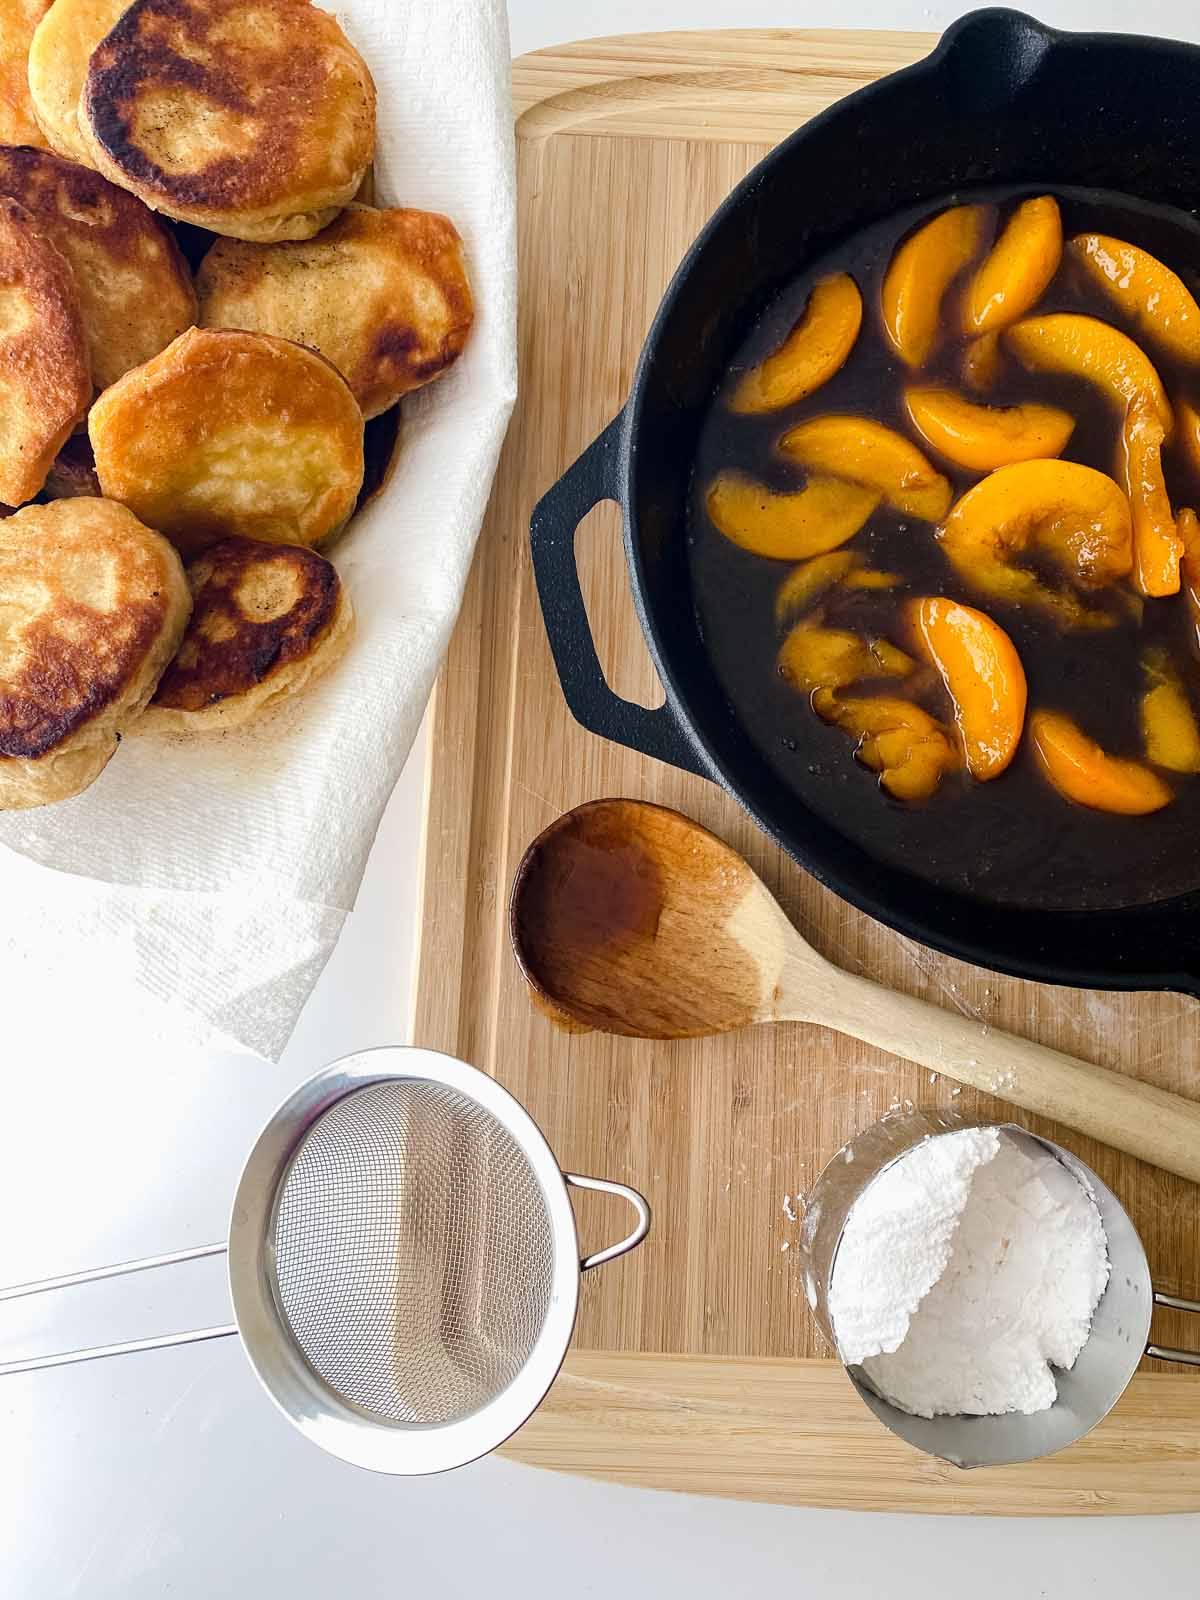 Fried biscuits next to the skillet with peaches.